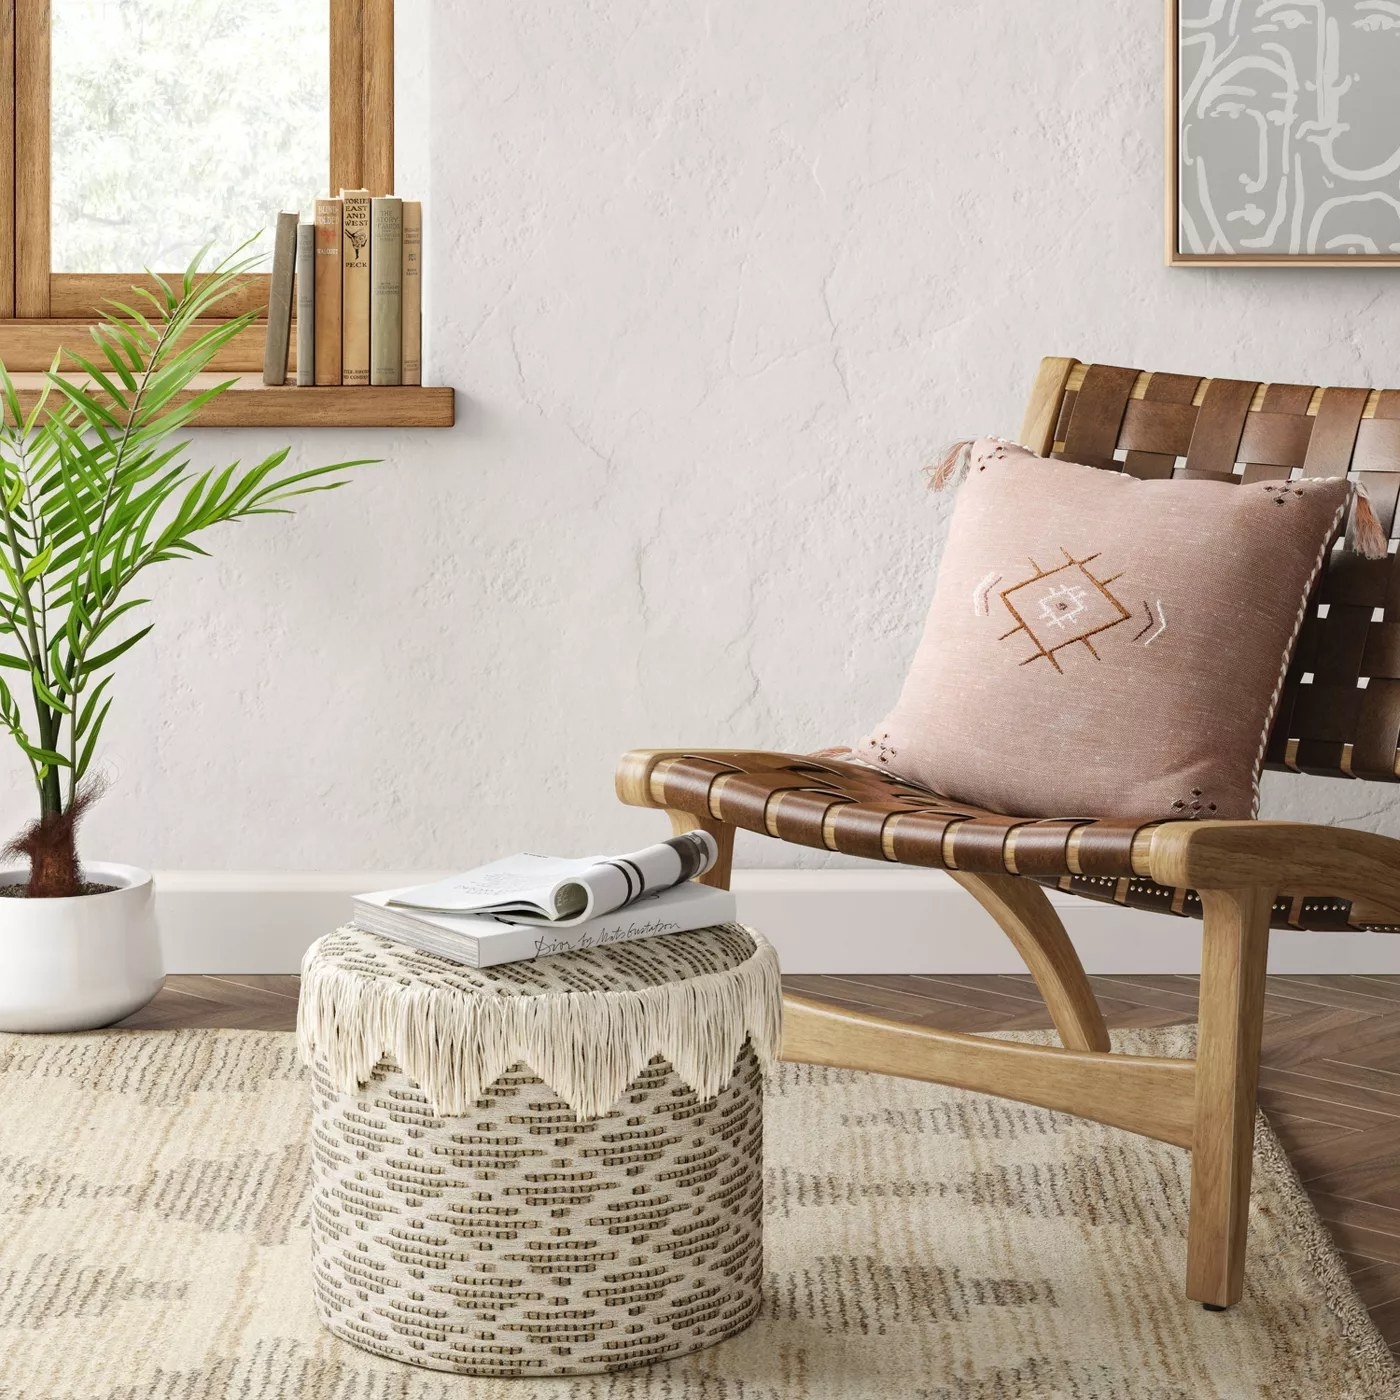 The circular pouf with fringe around the top in a living room